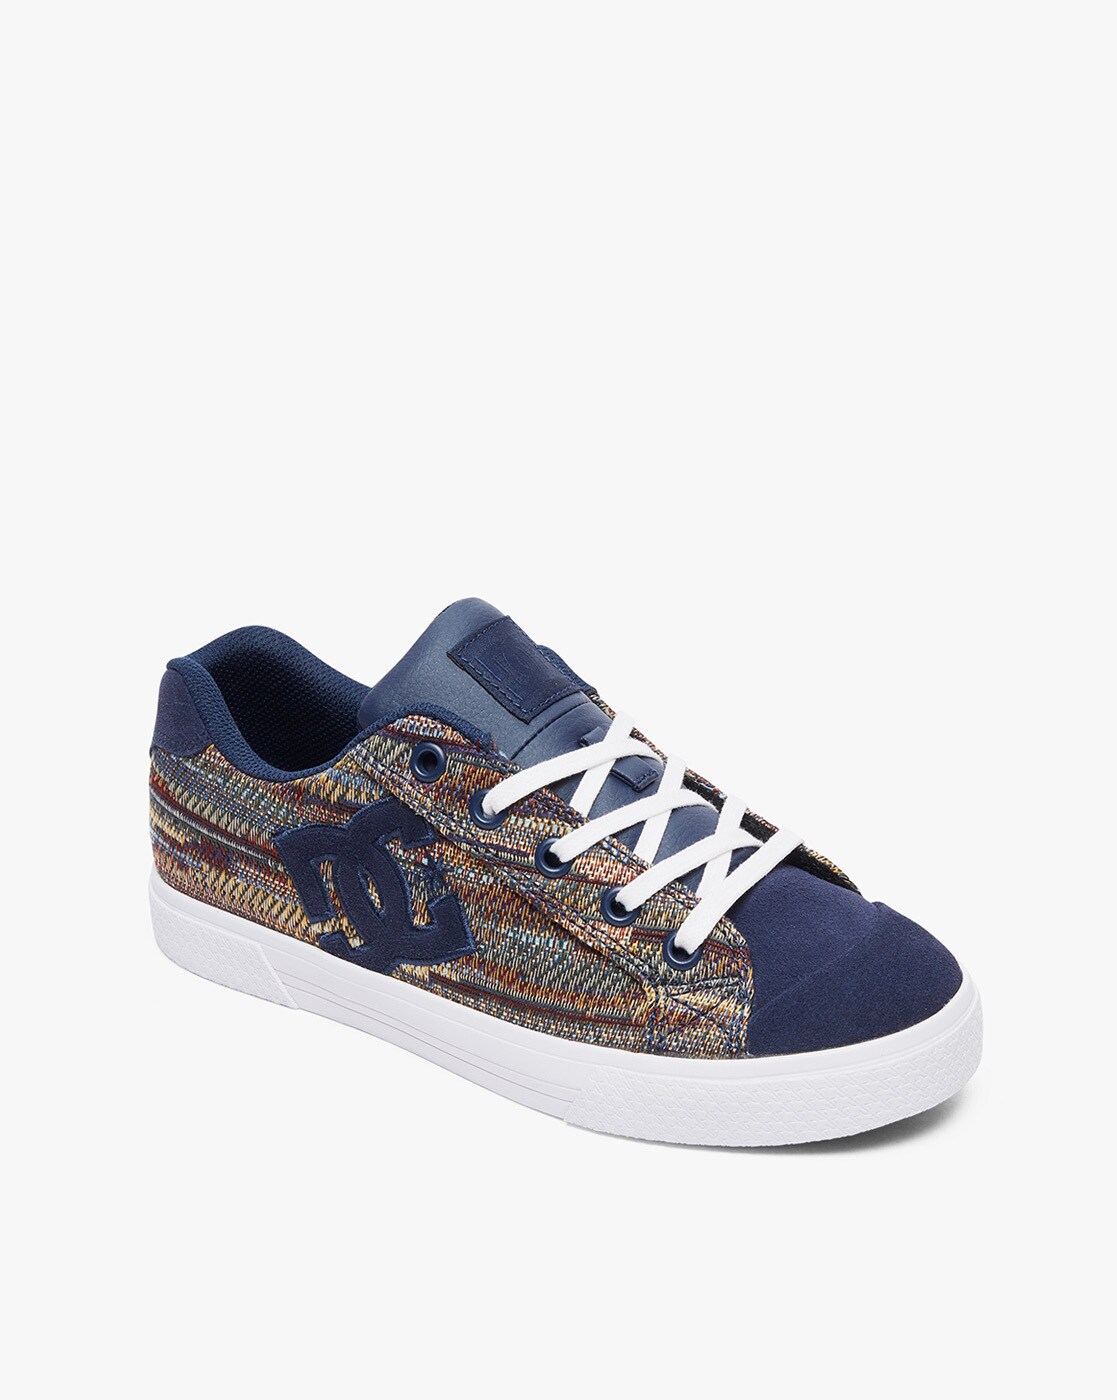 womens dc shoes on sale